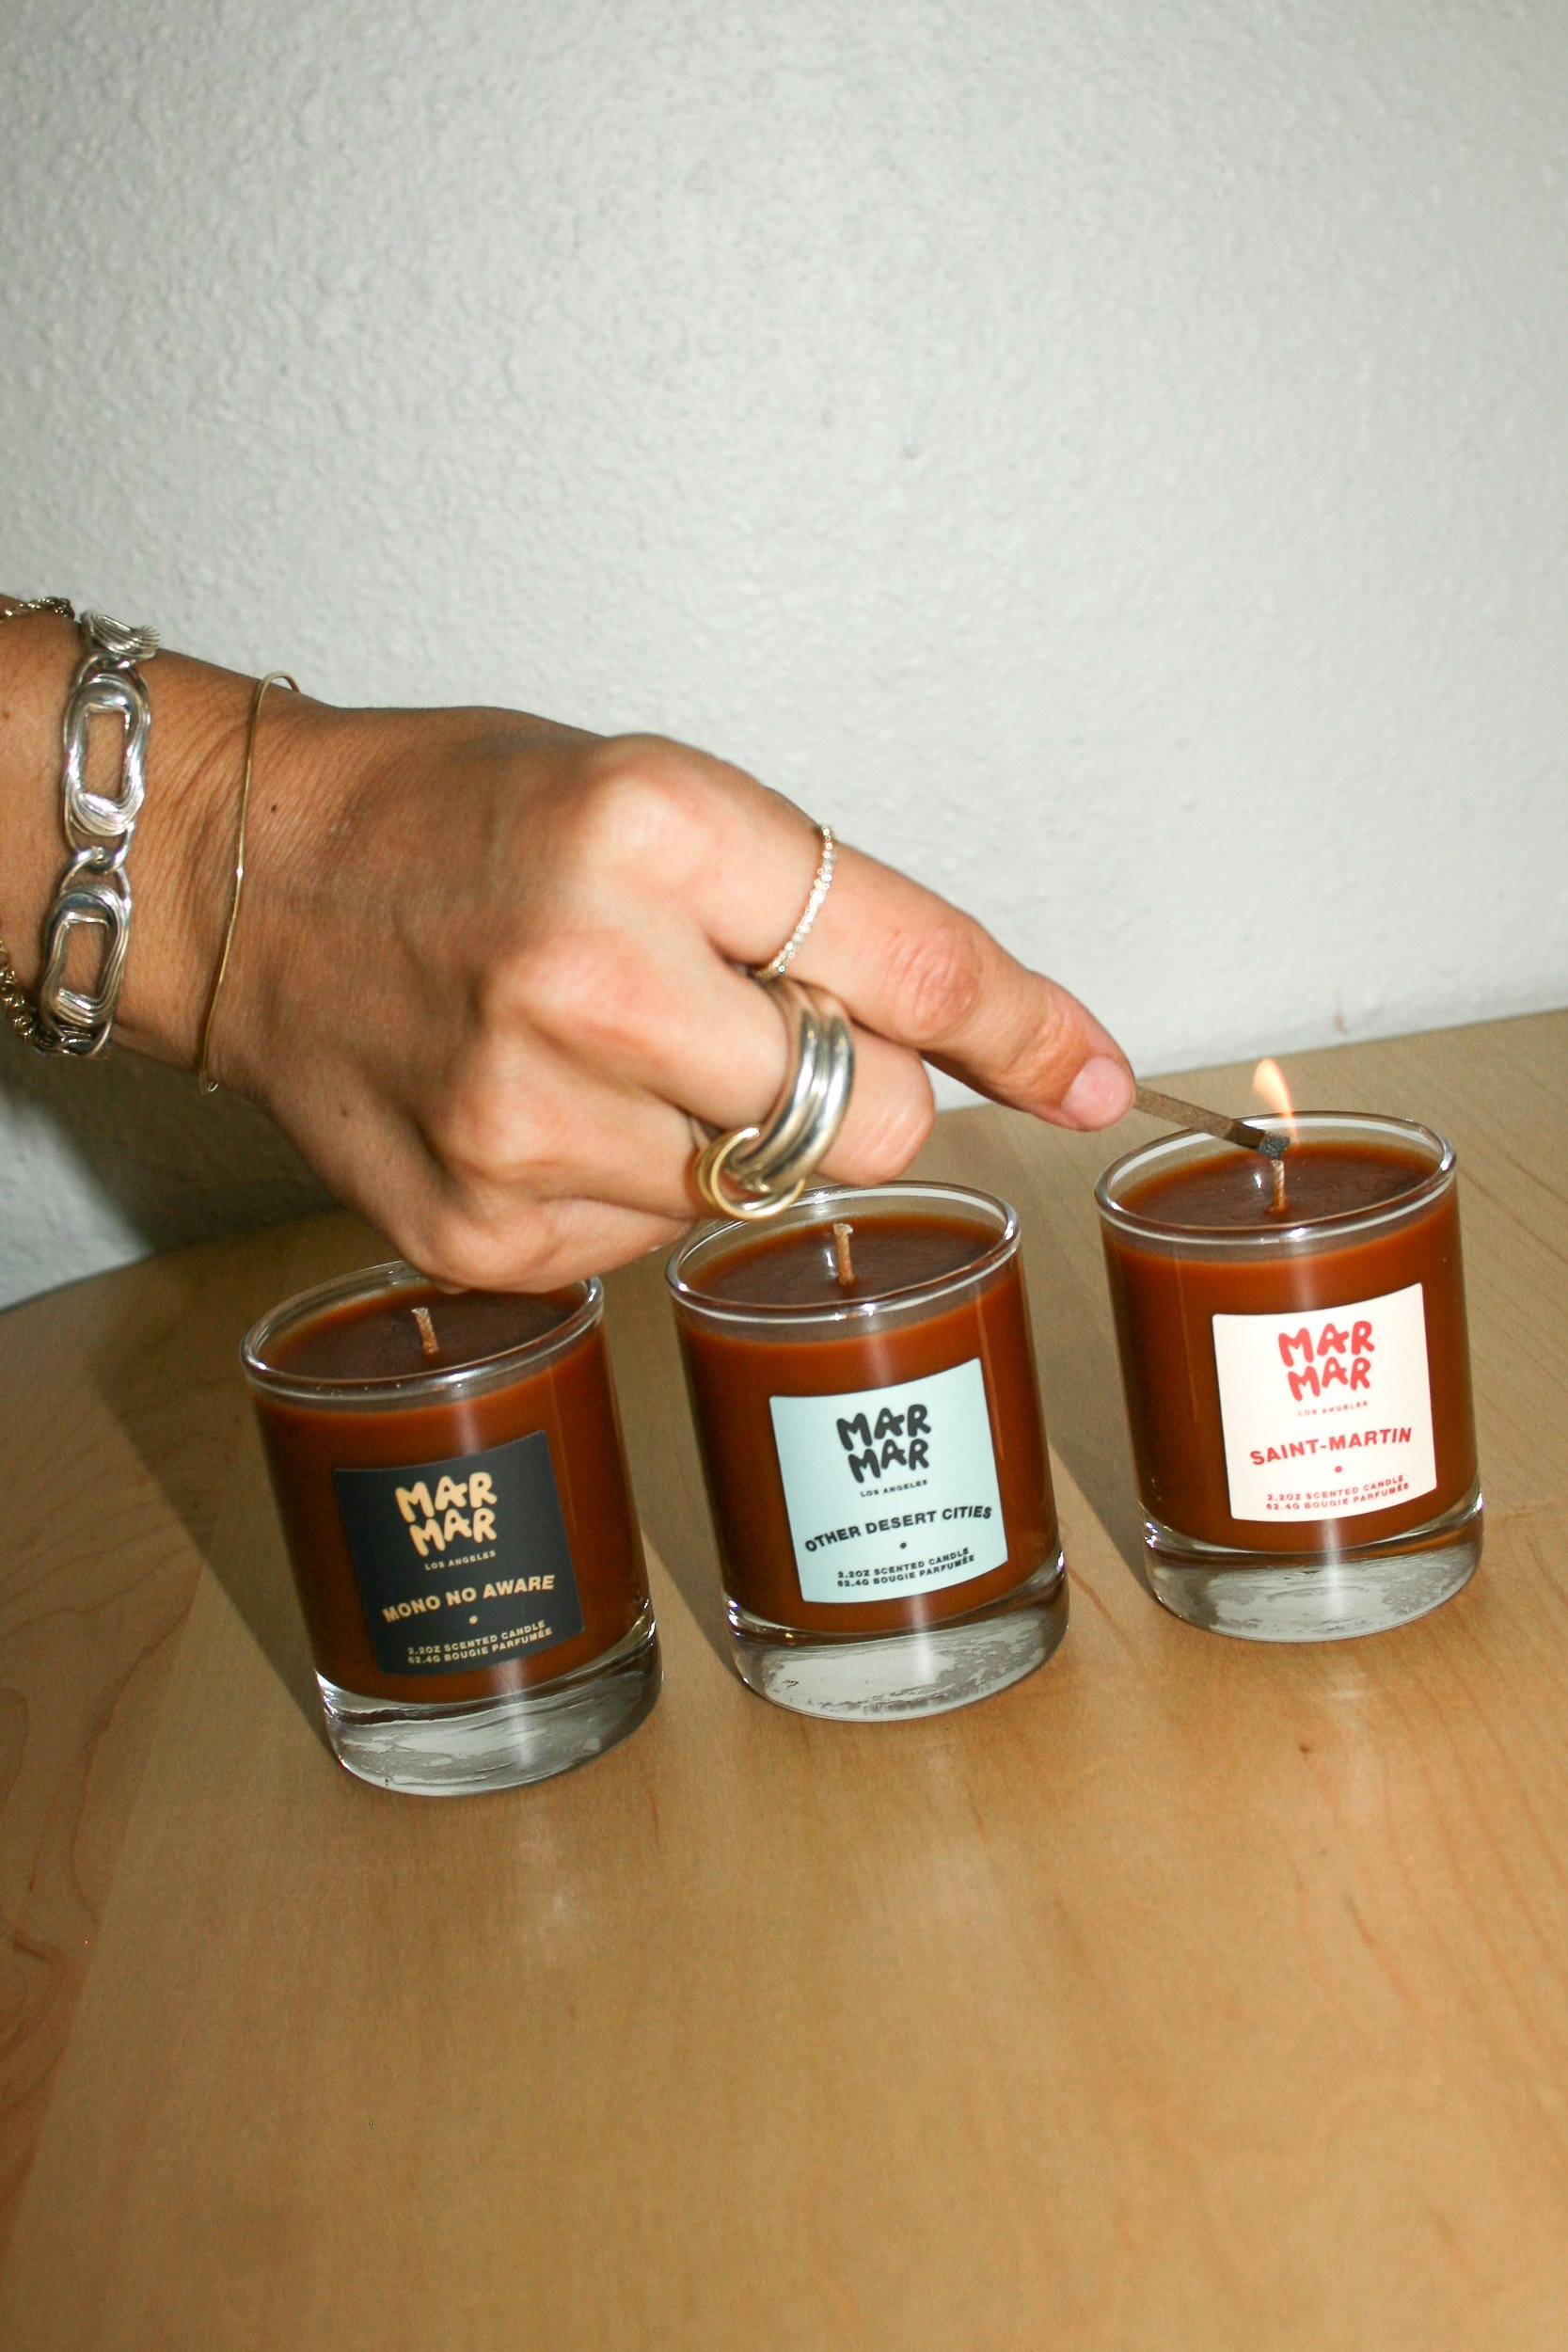 Product Image for Mini's Votive Candle Gift Set